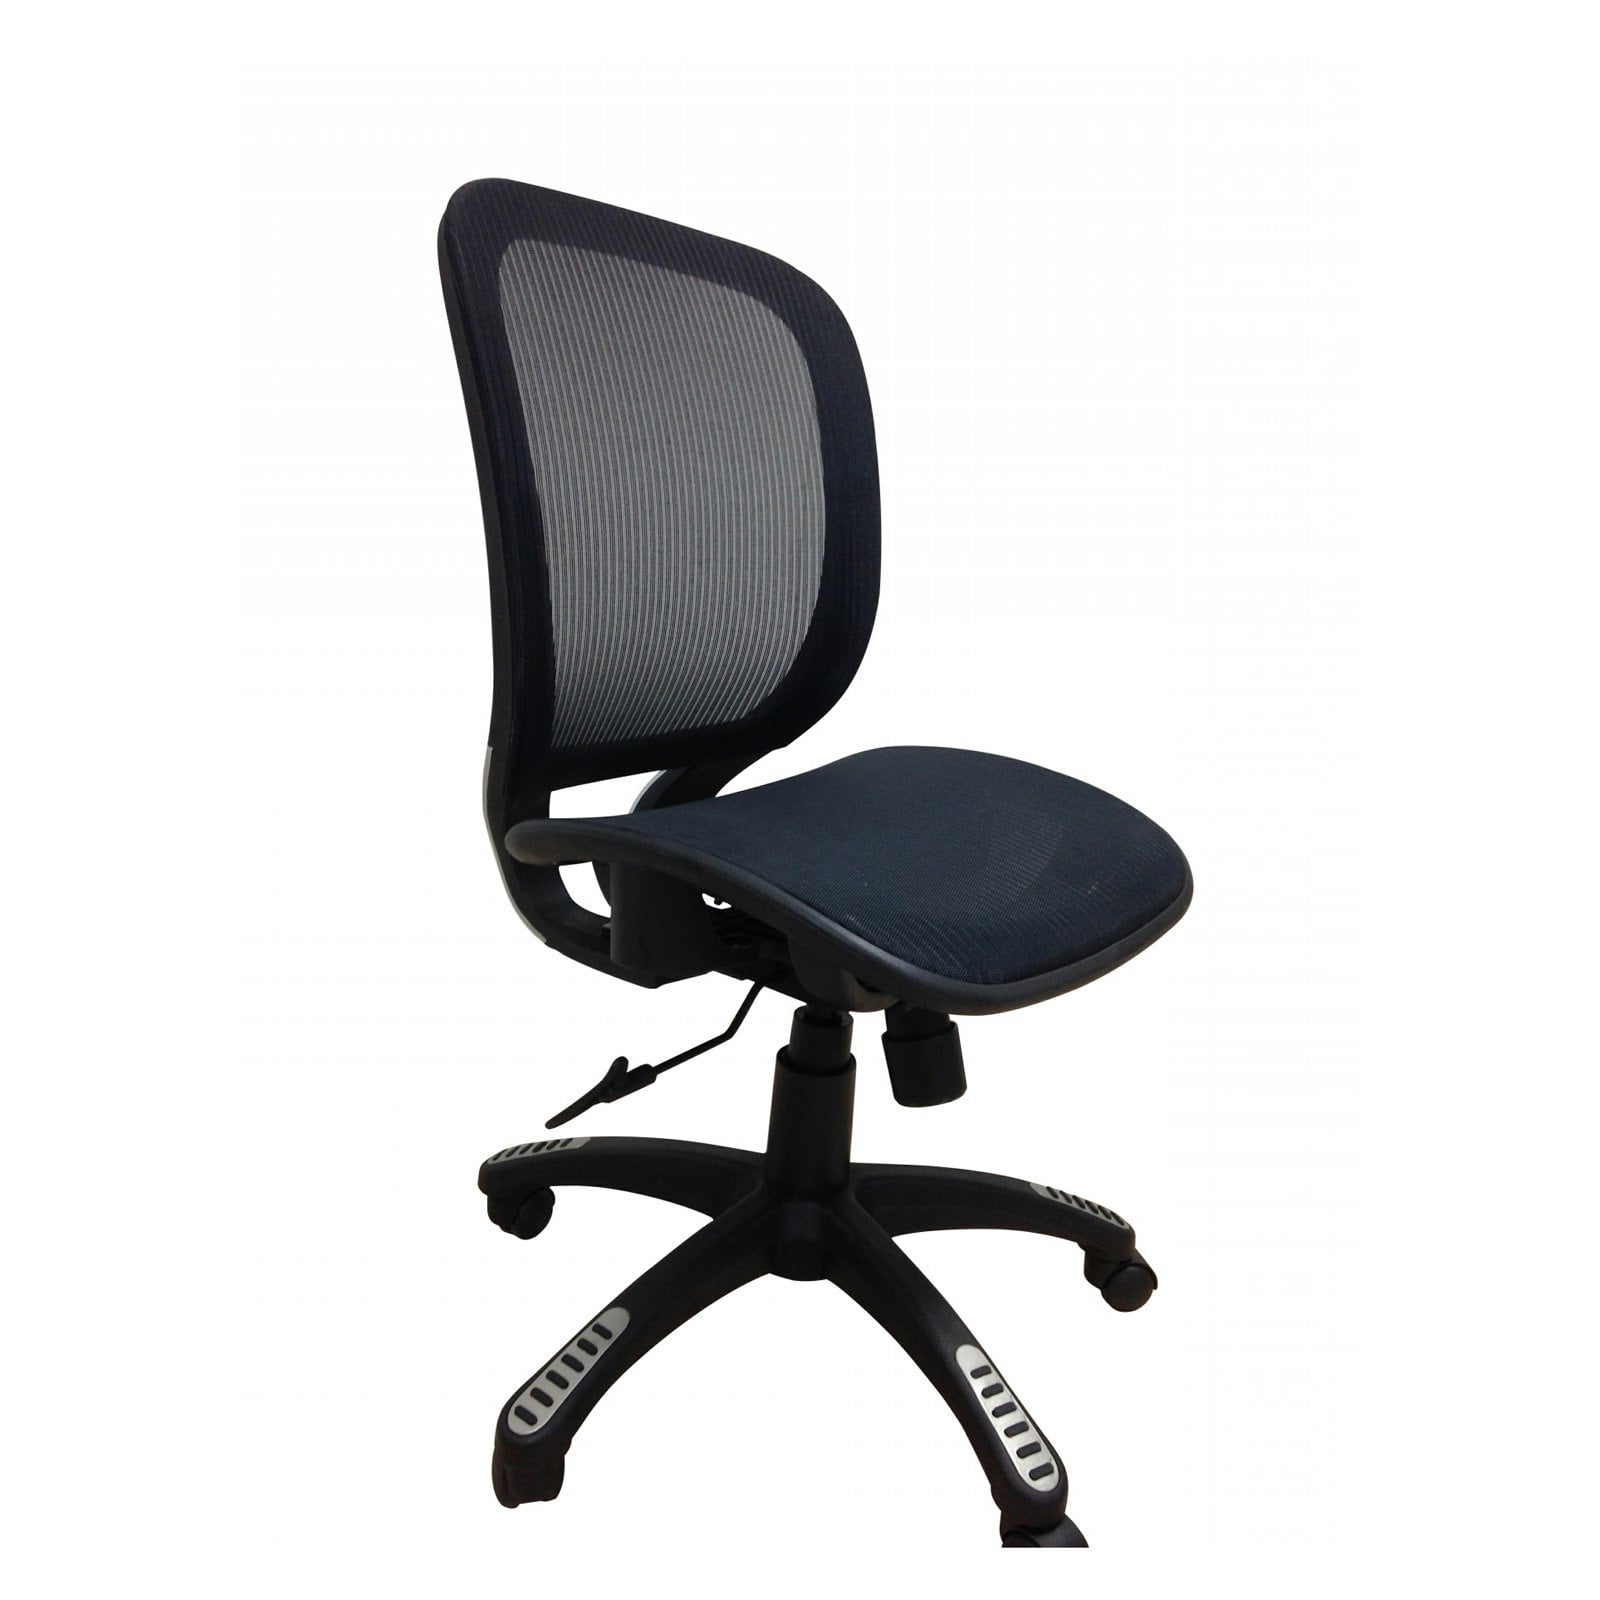 Msh102bkna Fully Meshed Ergo Office Chair - Black